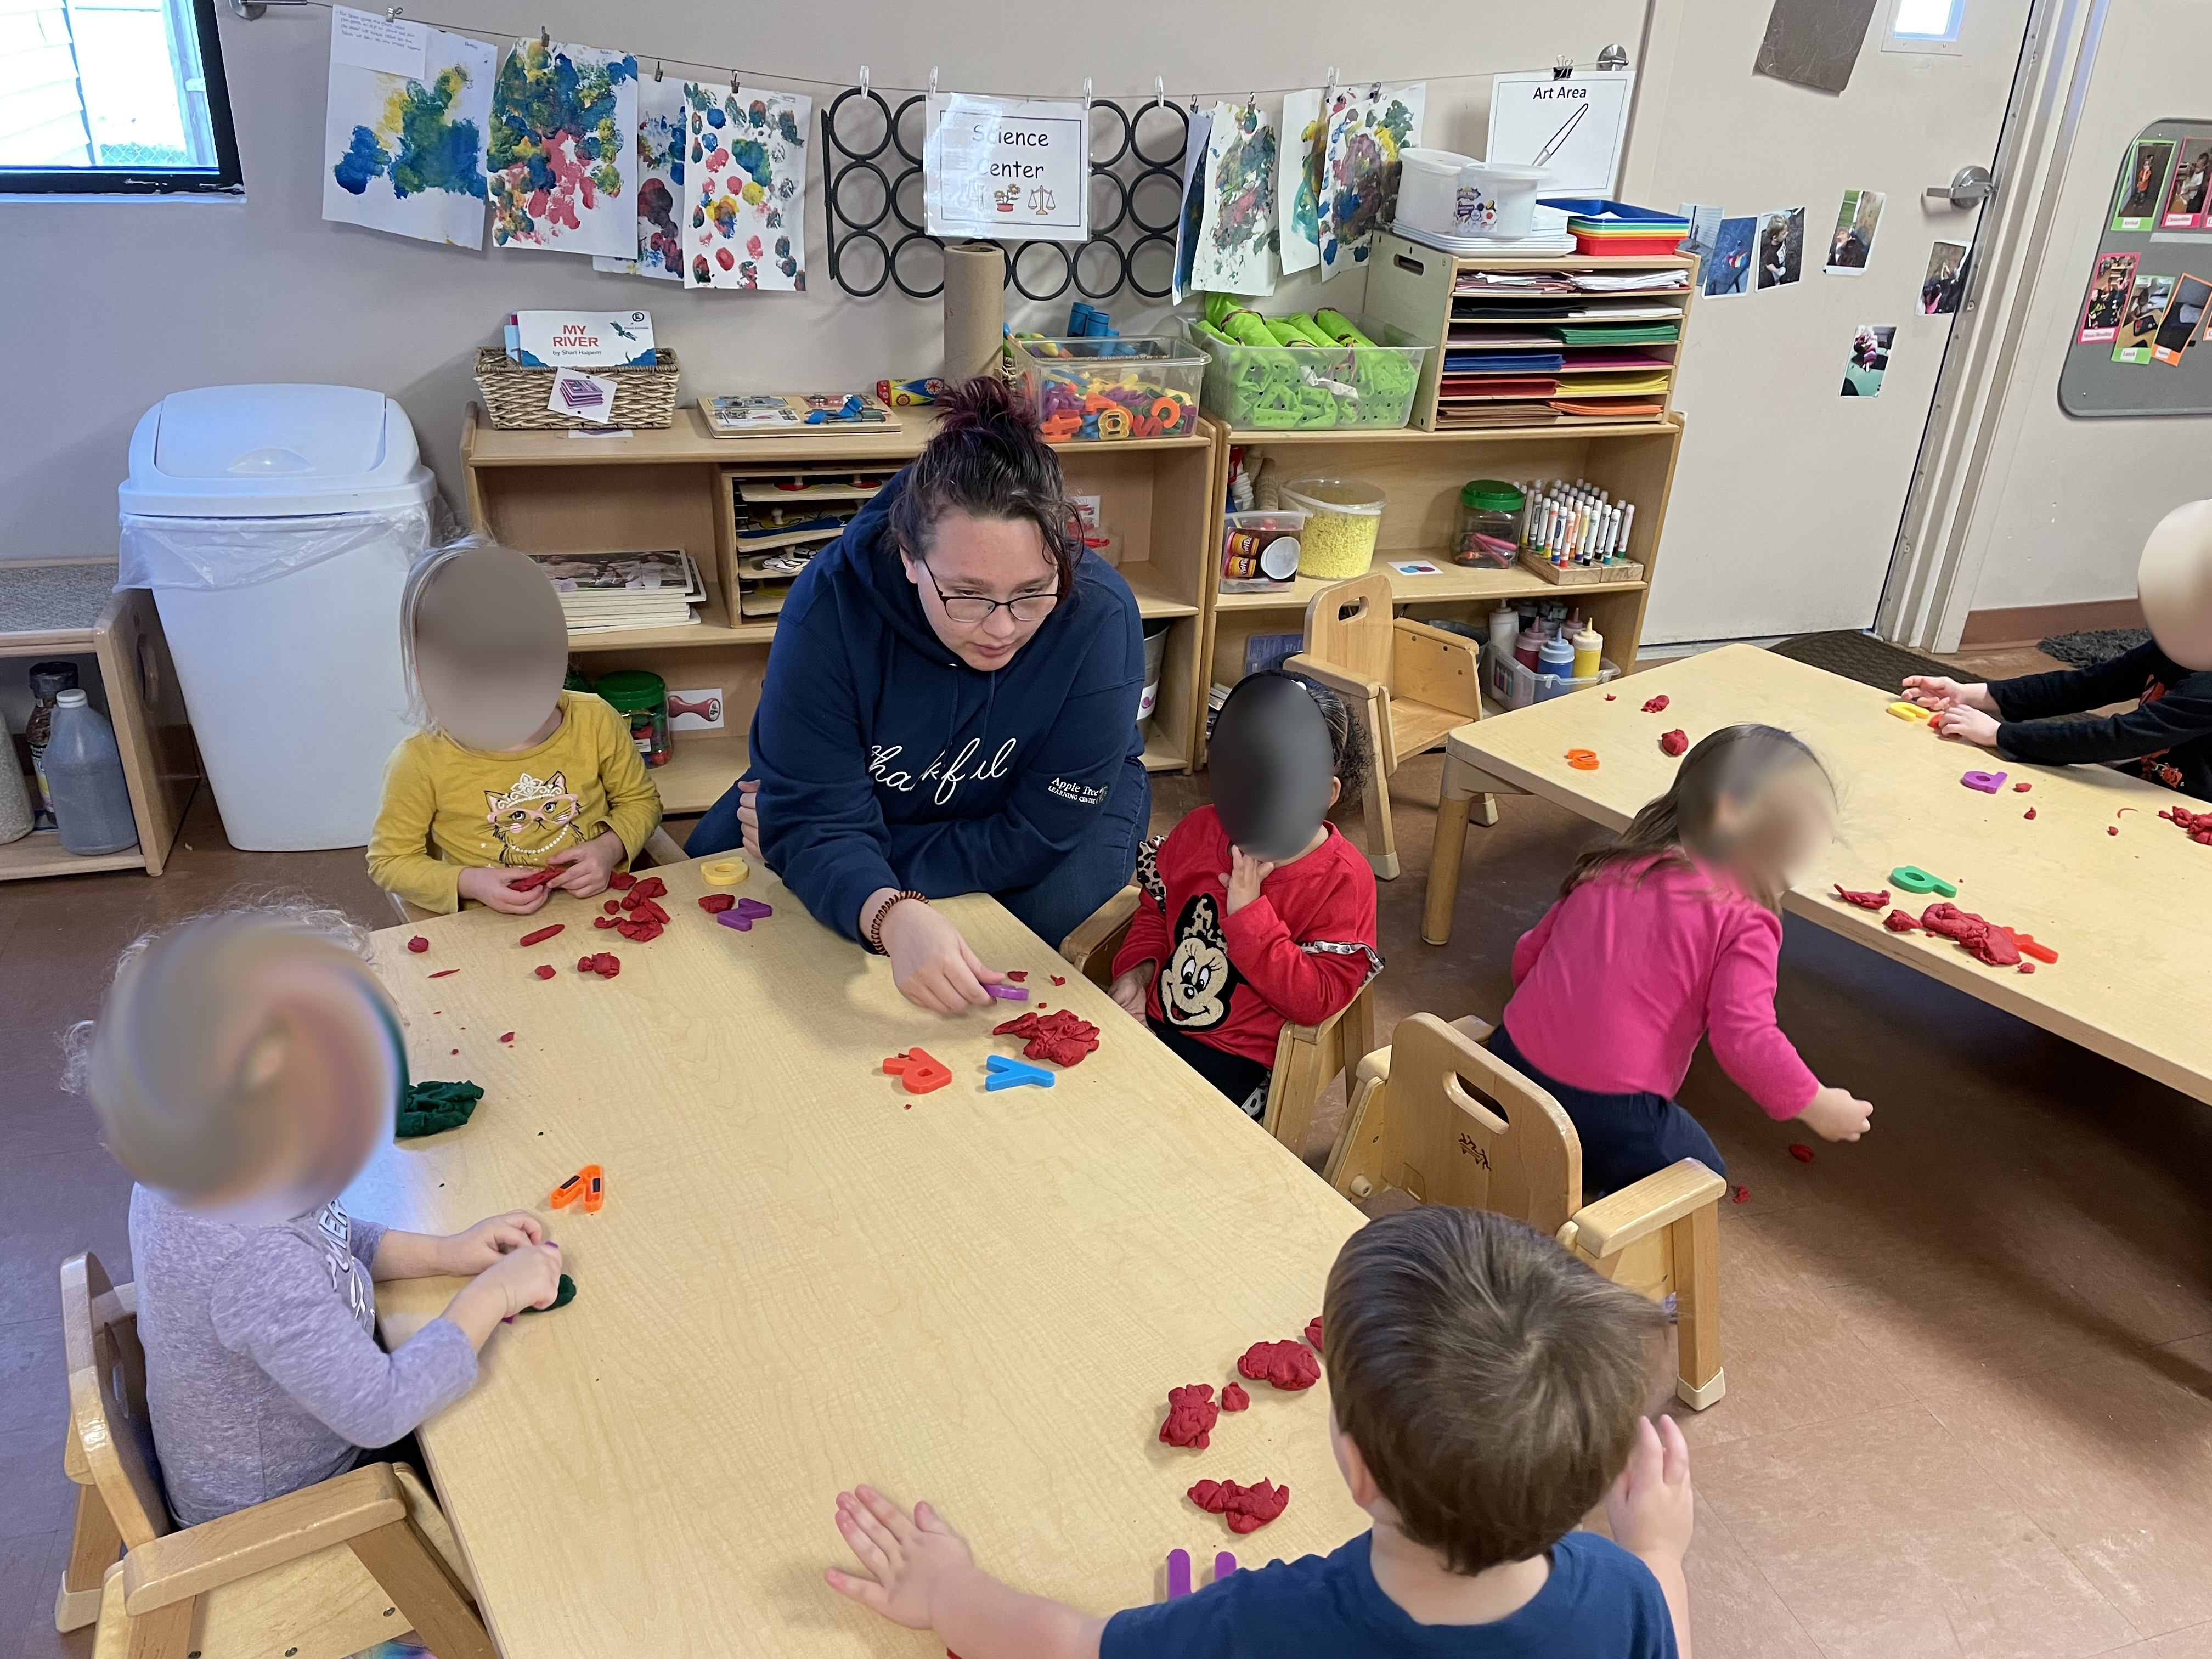 A child care worker engages with children.